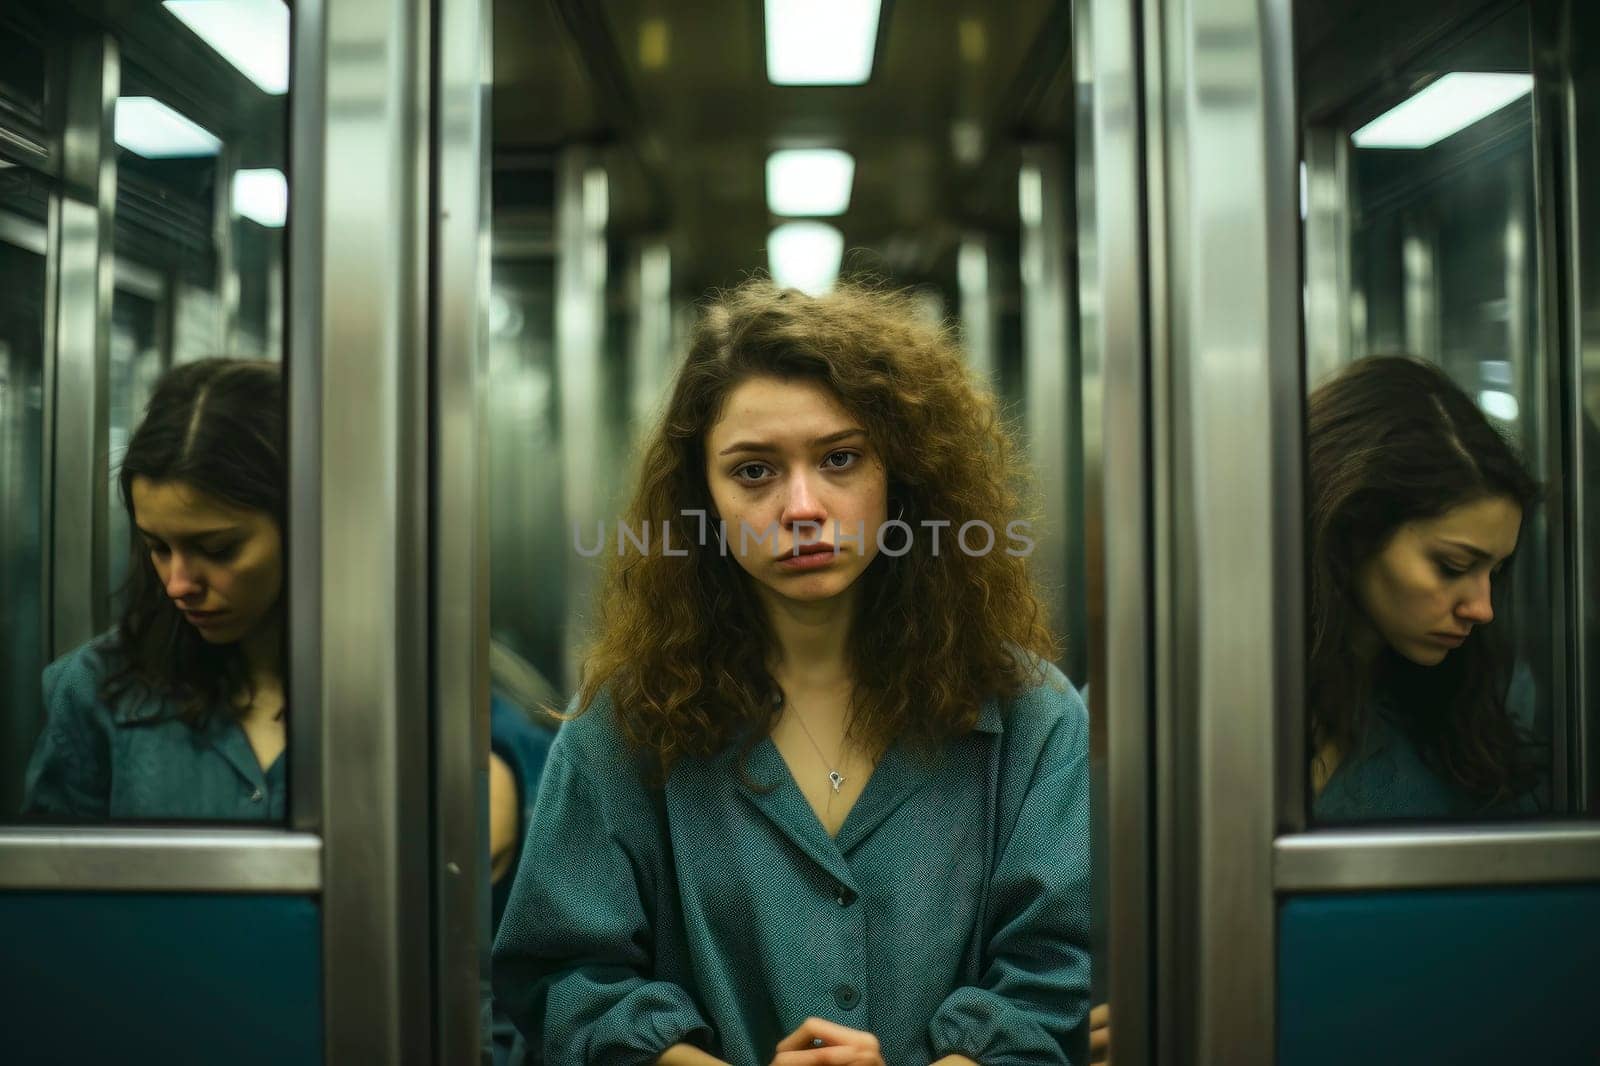 Explore the intriguing journey of a girl with multiple personalities as she travels on the metro.